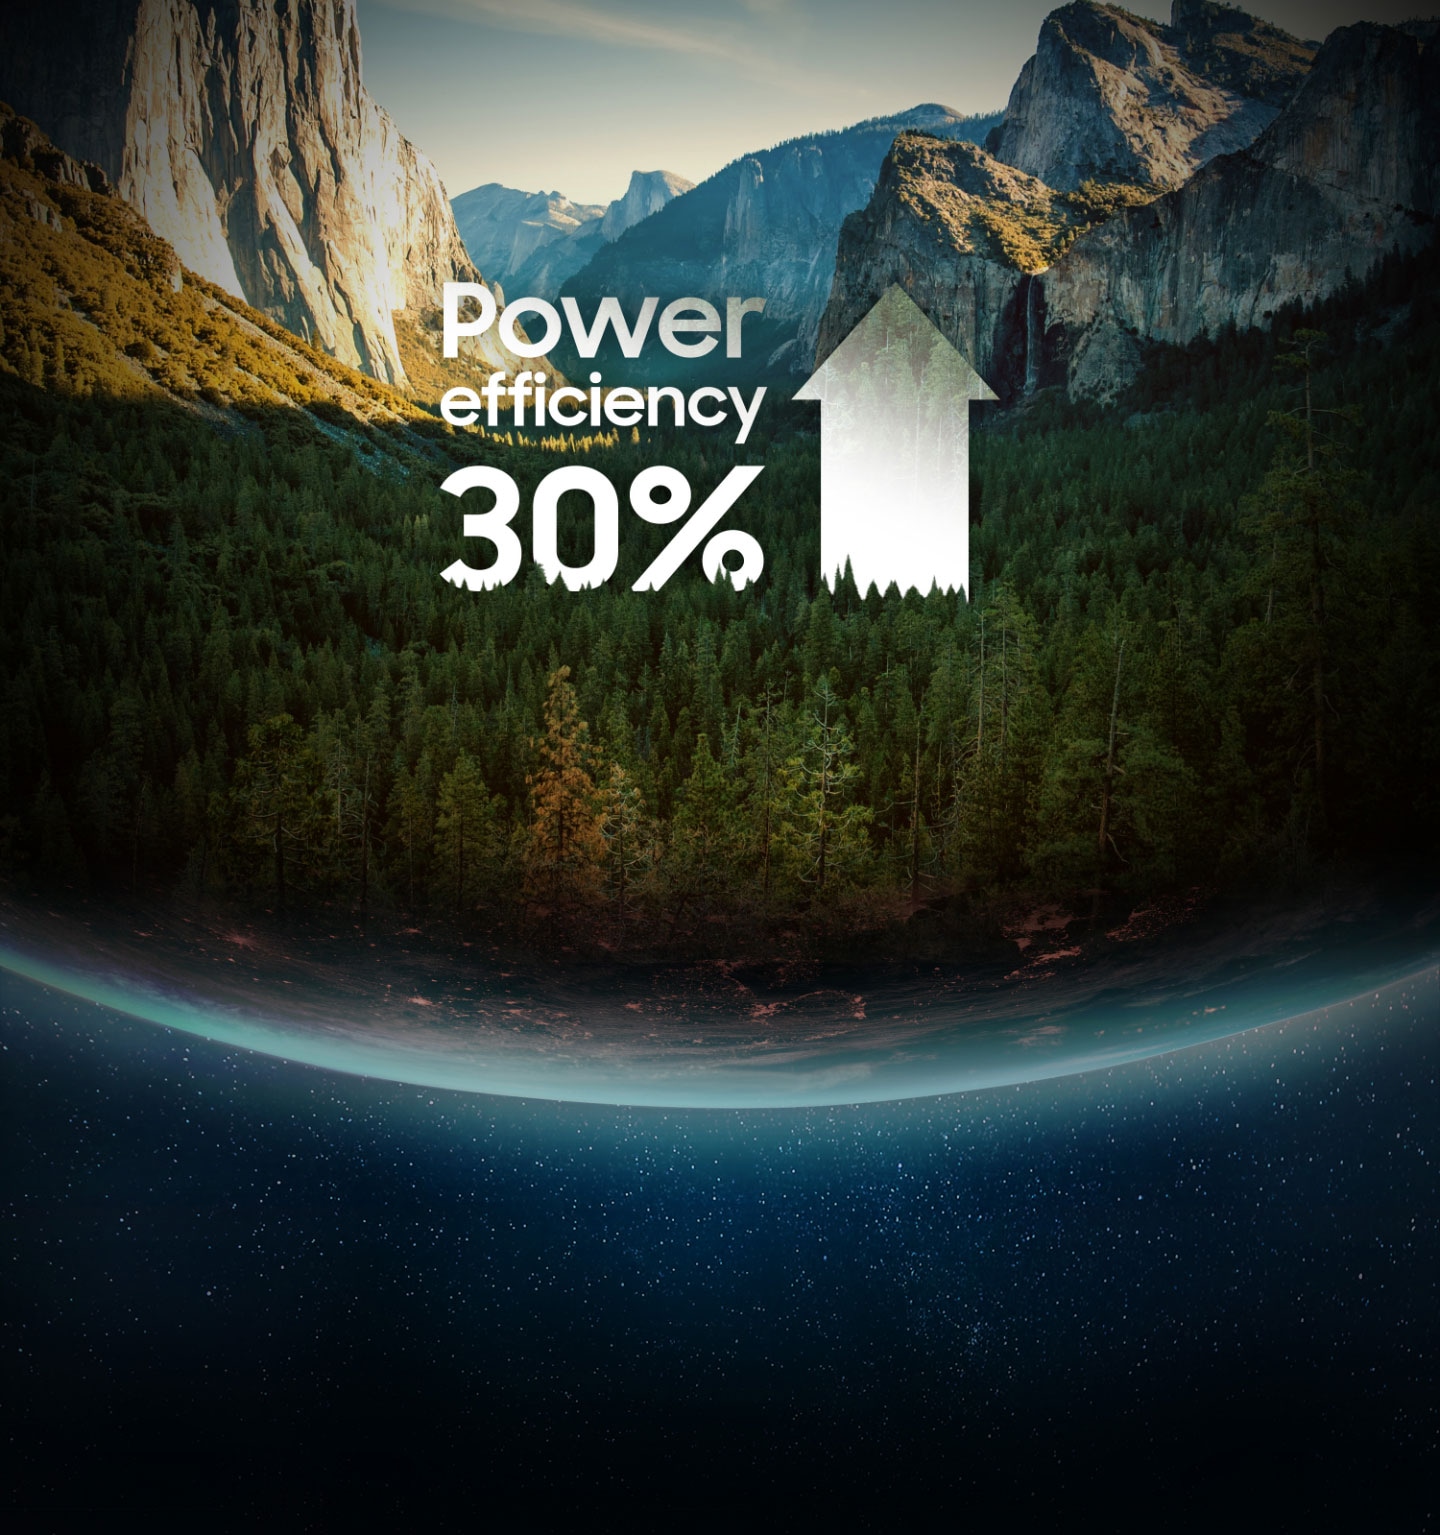 An illustrative image of 'up to Power efficiency 30%' typography against an image of trees, mountain in the earth.